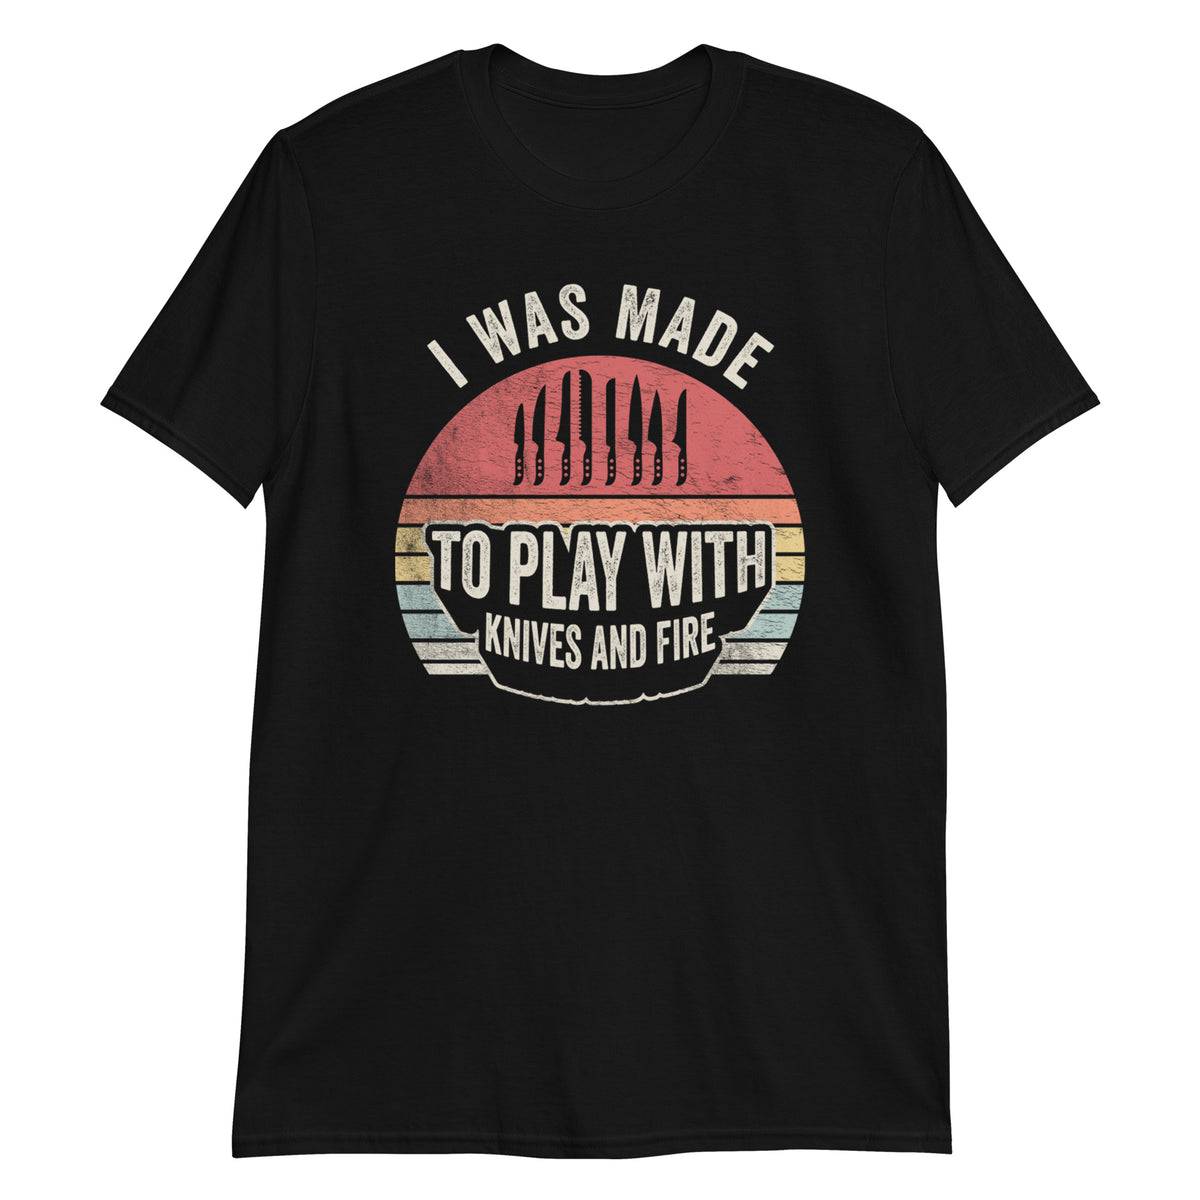 I Was Made to Play With Knives and Fire T-Shirt